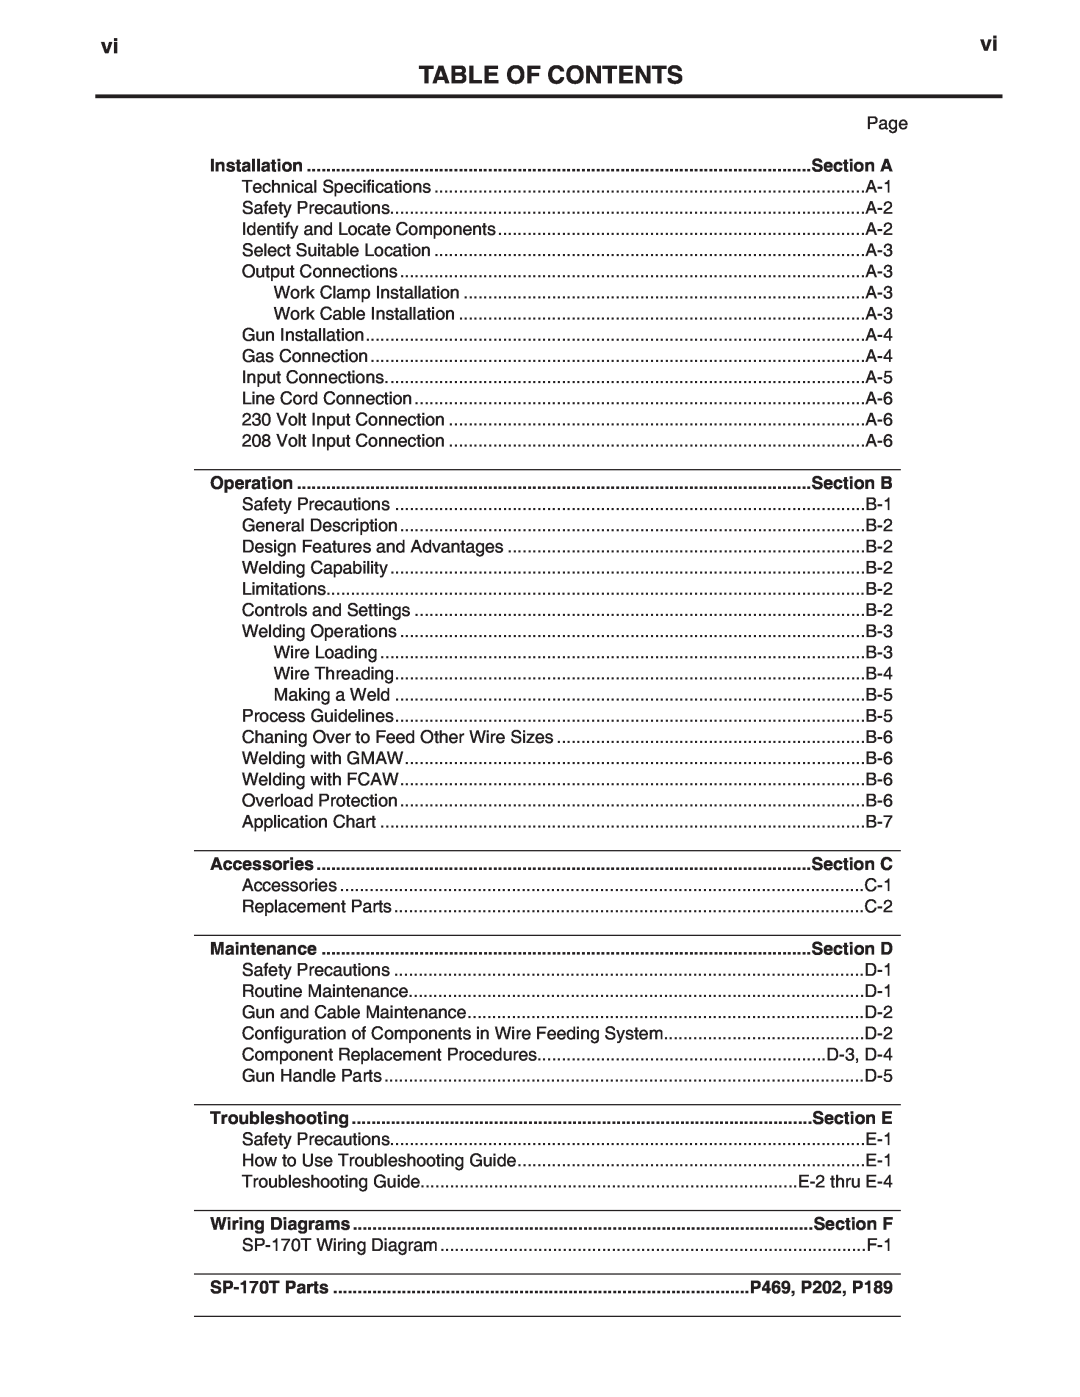 Lincoln Electric IM794 manual Table Of Contents, Section A, Section B, Section C, Section D, Section E, Section F 